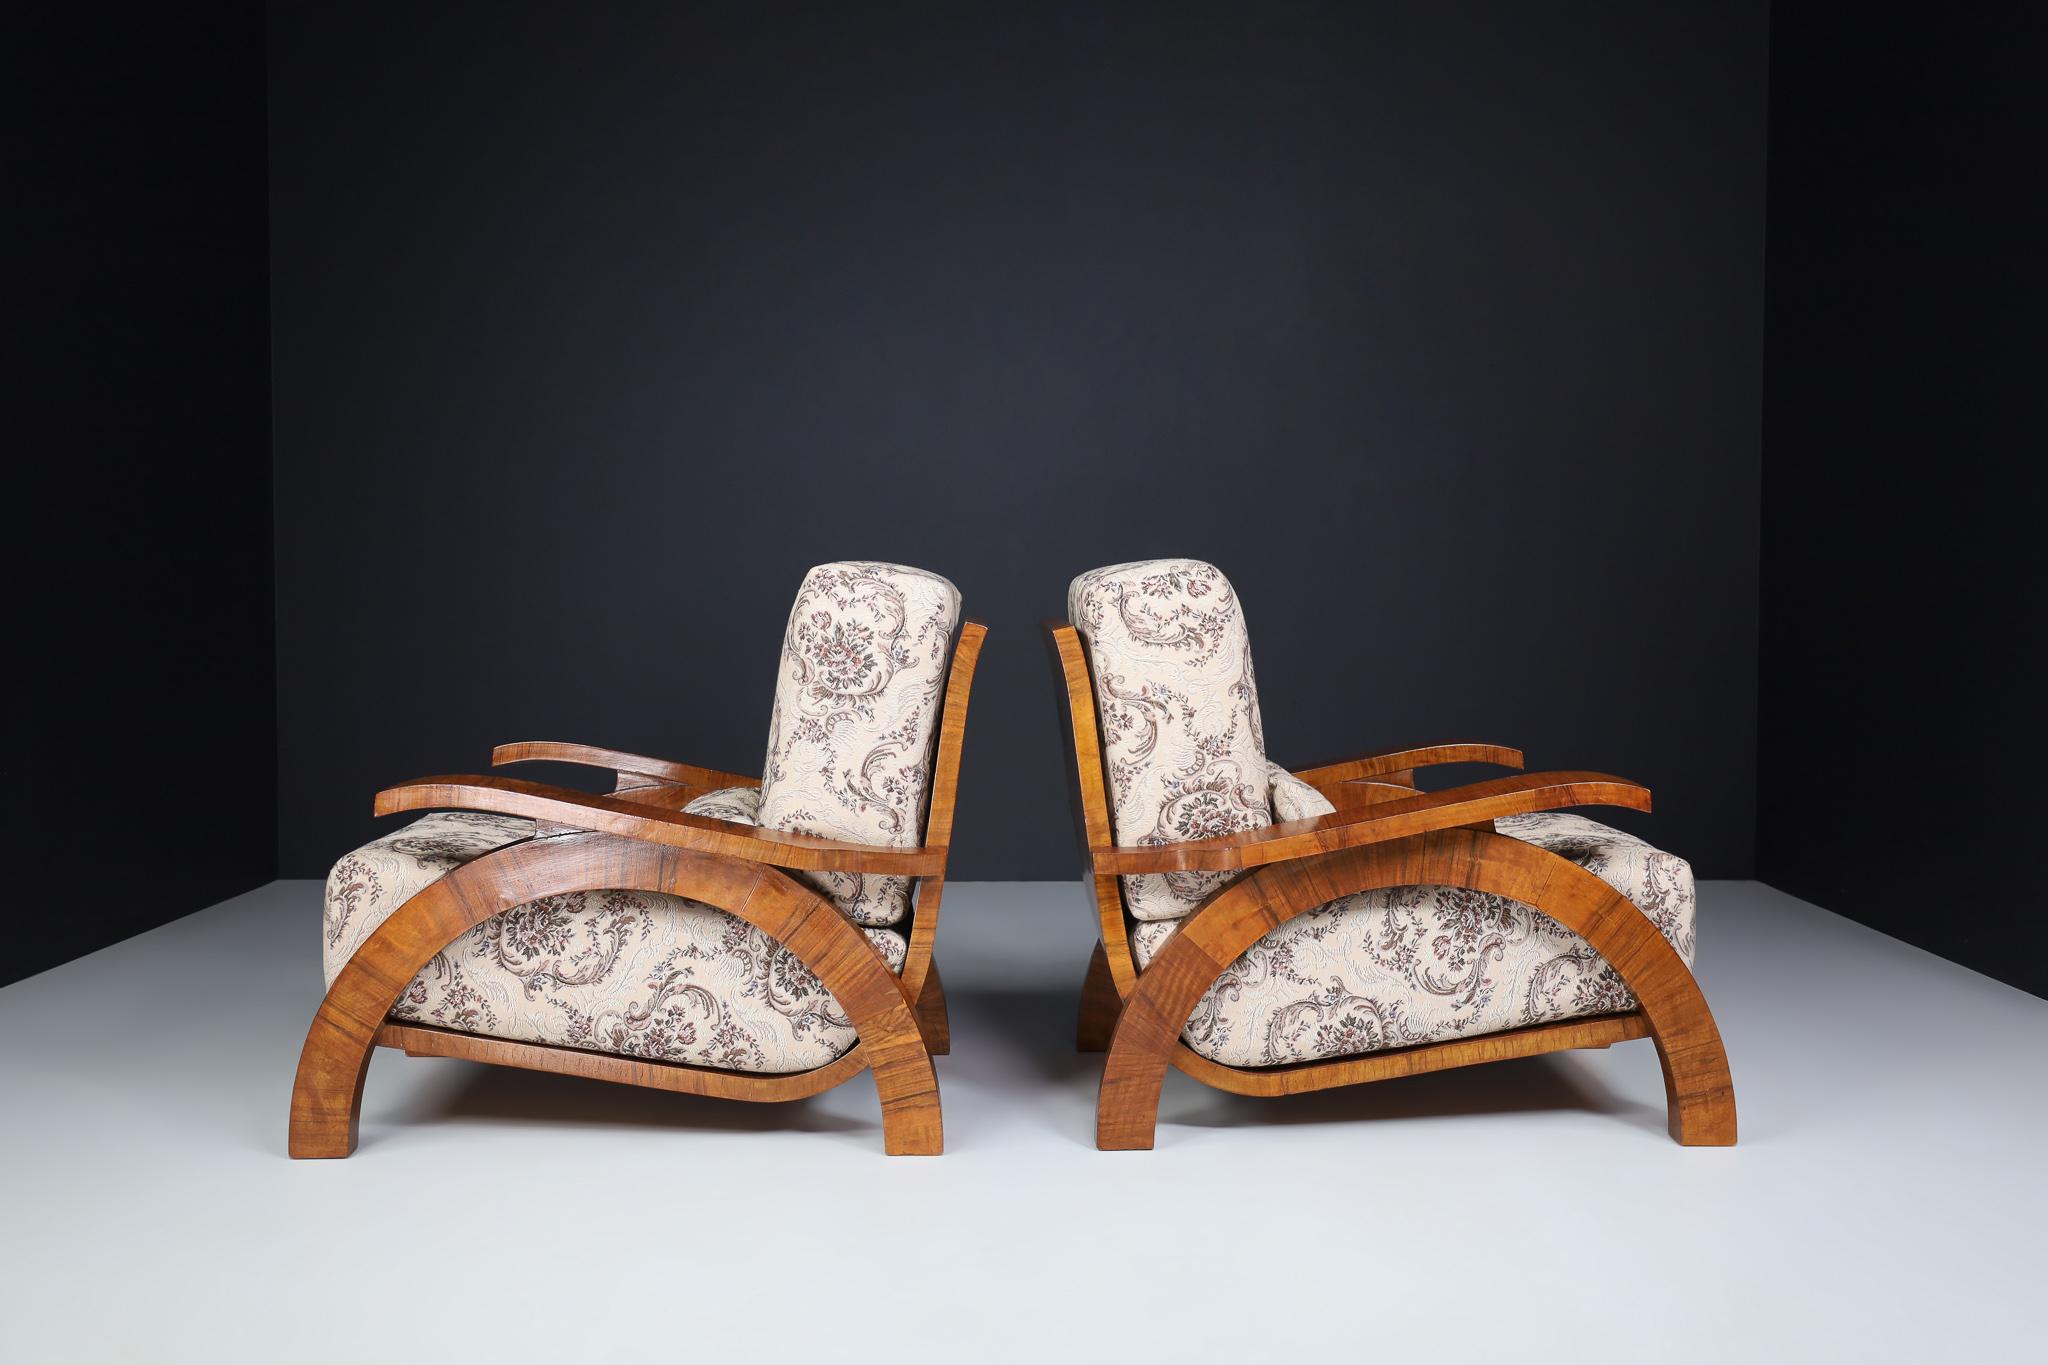 Czech Large Monumental Art Deco Armchairs in Walnut and Original Fabric, Prague 1930s For Sale